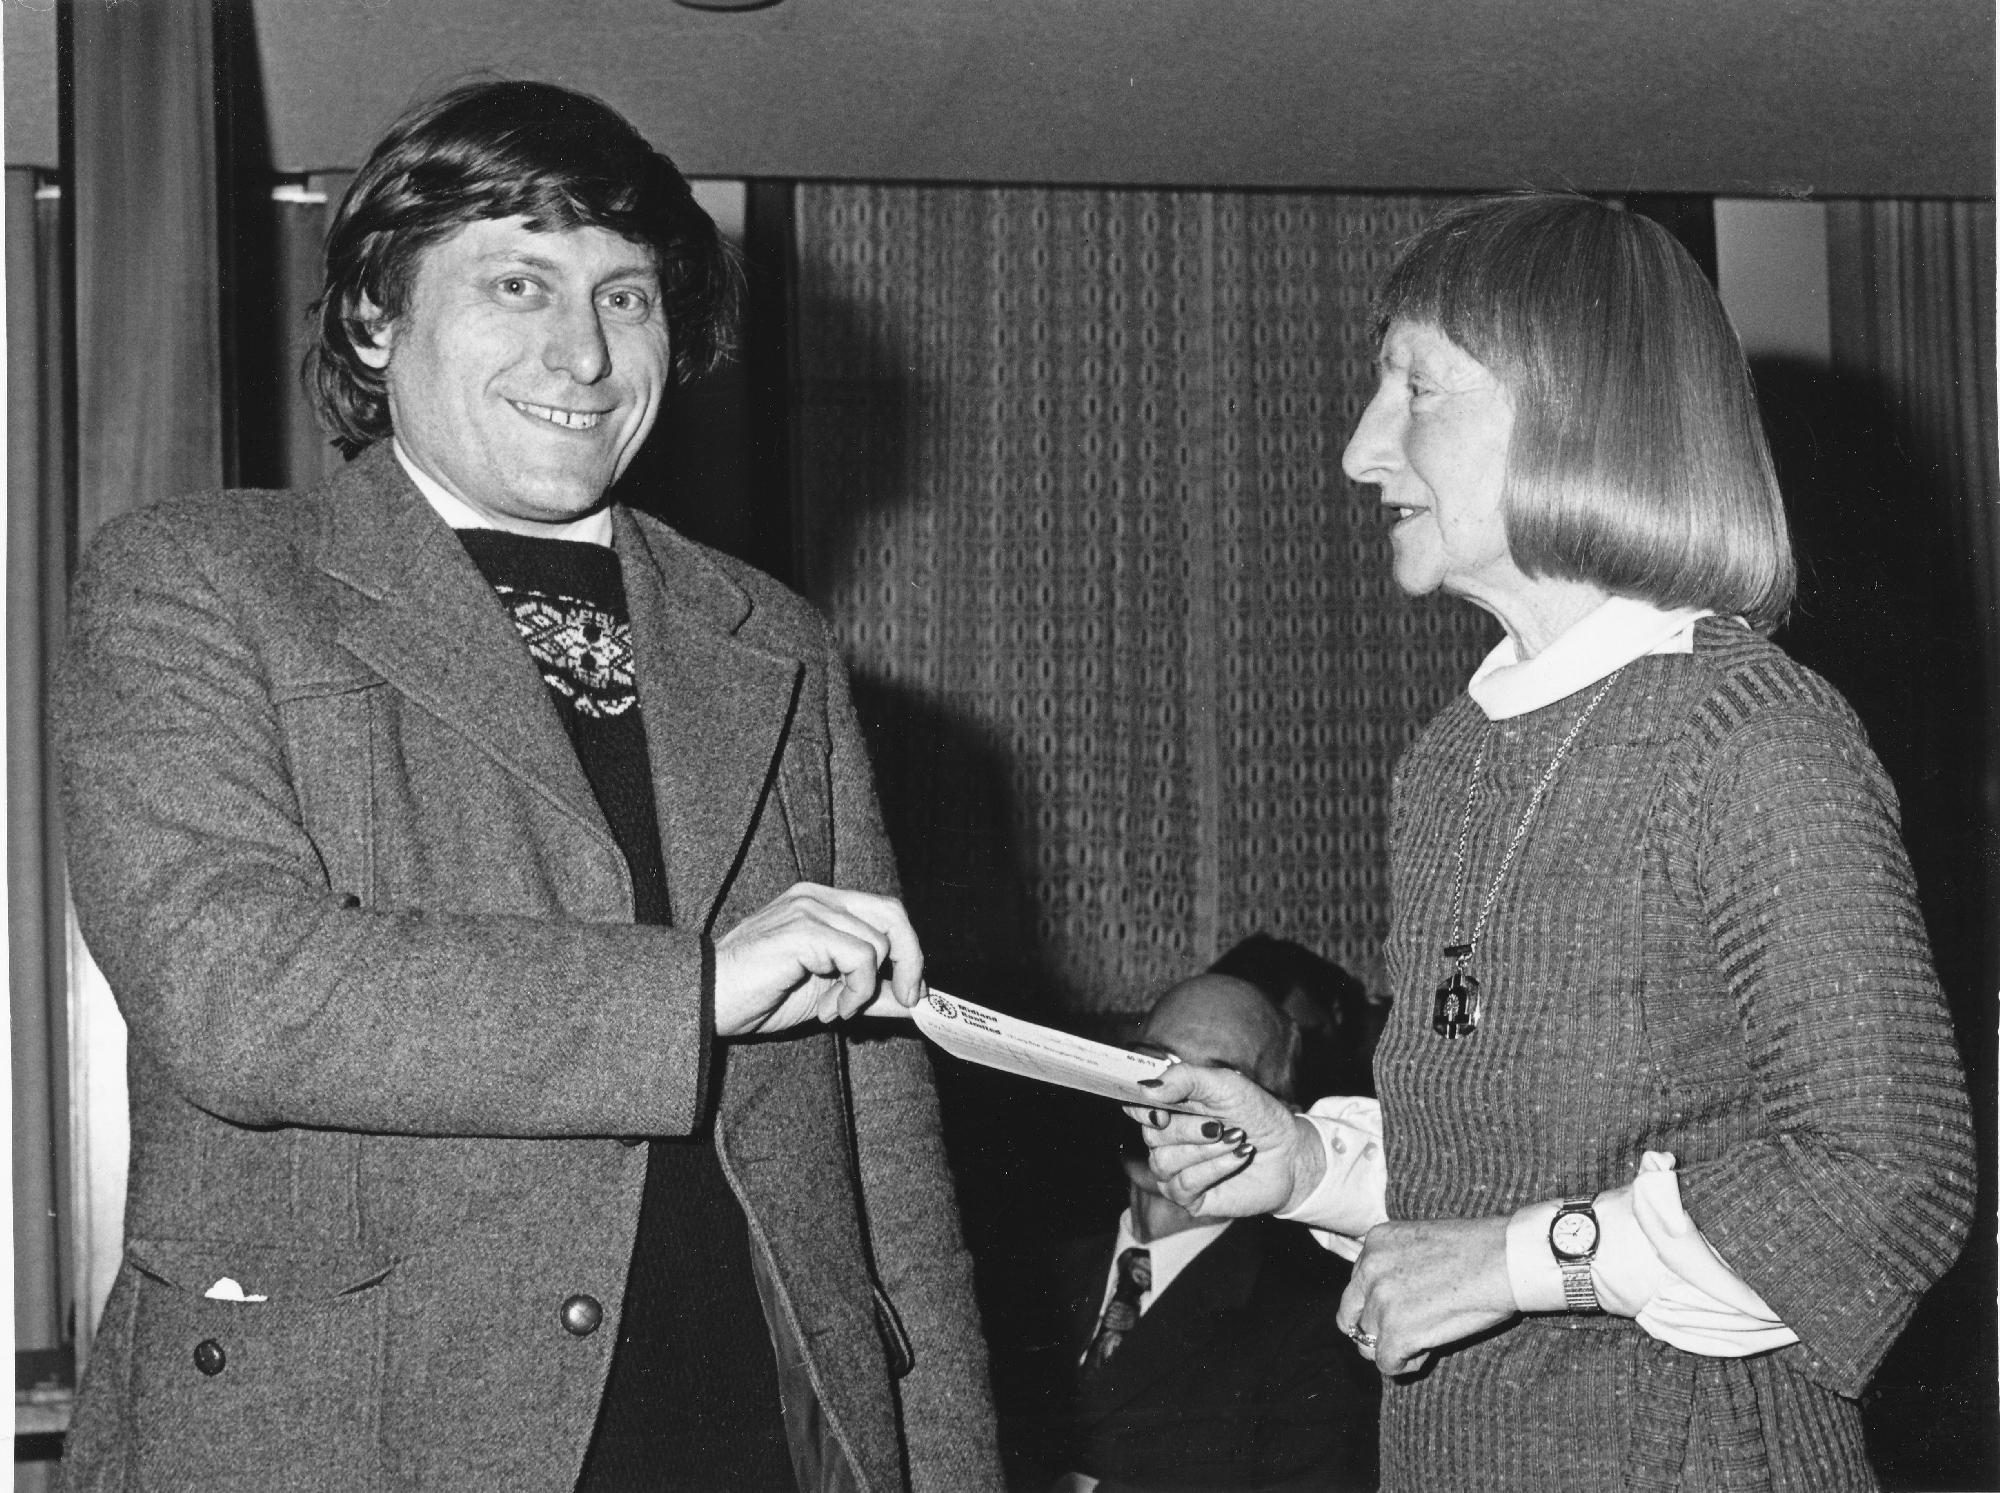 Dave Rumens is pleased to accept a cheque for £200 from Lady Thelma Milner-Barry for winning the 1978 Nottingham Congress with 5.5/6. Photo provided by Nottinghamshire County Council.